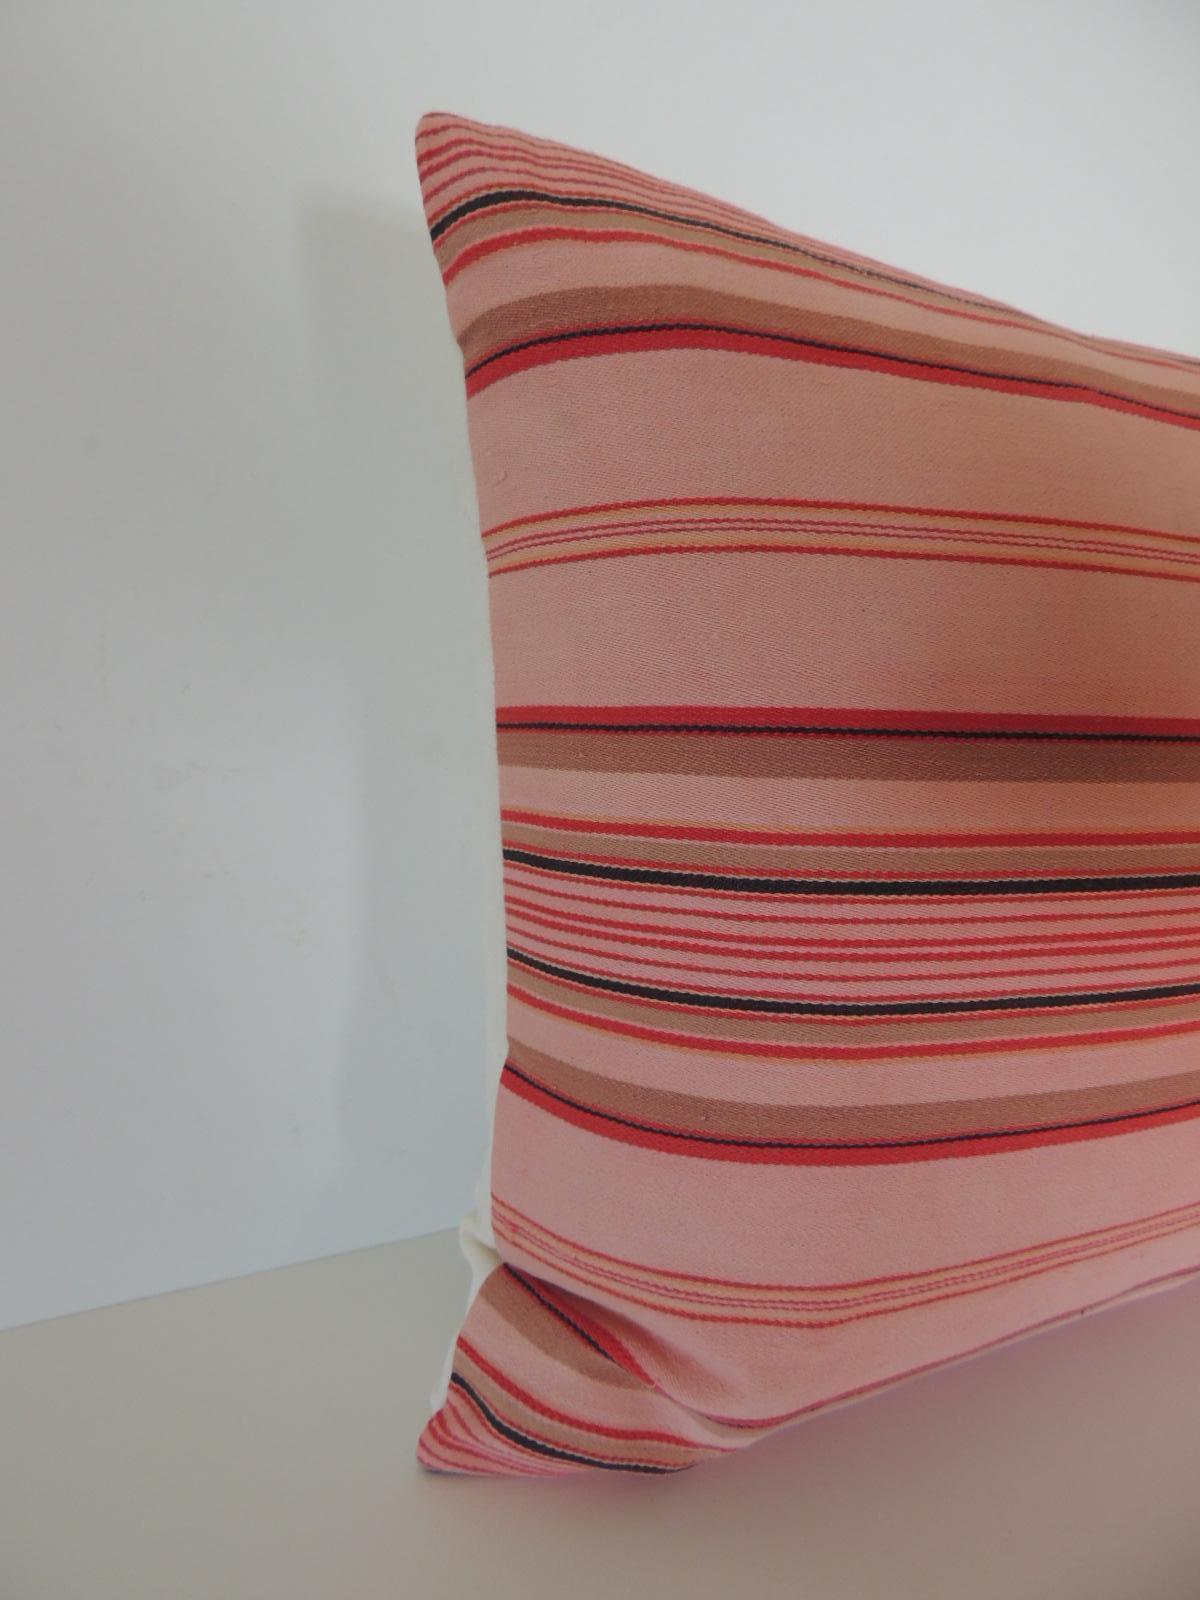 Vintage French pink and red stripes lumbar decorative pillow
French provincial linen ticking stripes lumbar decorative pillow in shades of light pink, dark pink, red, taupe, tan and natural with a natural linen backing. French provincial refers to